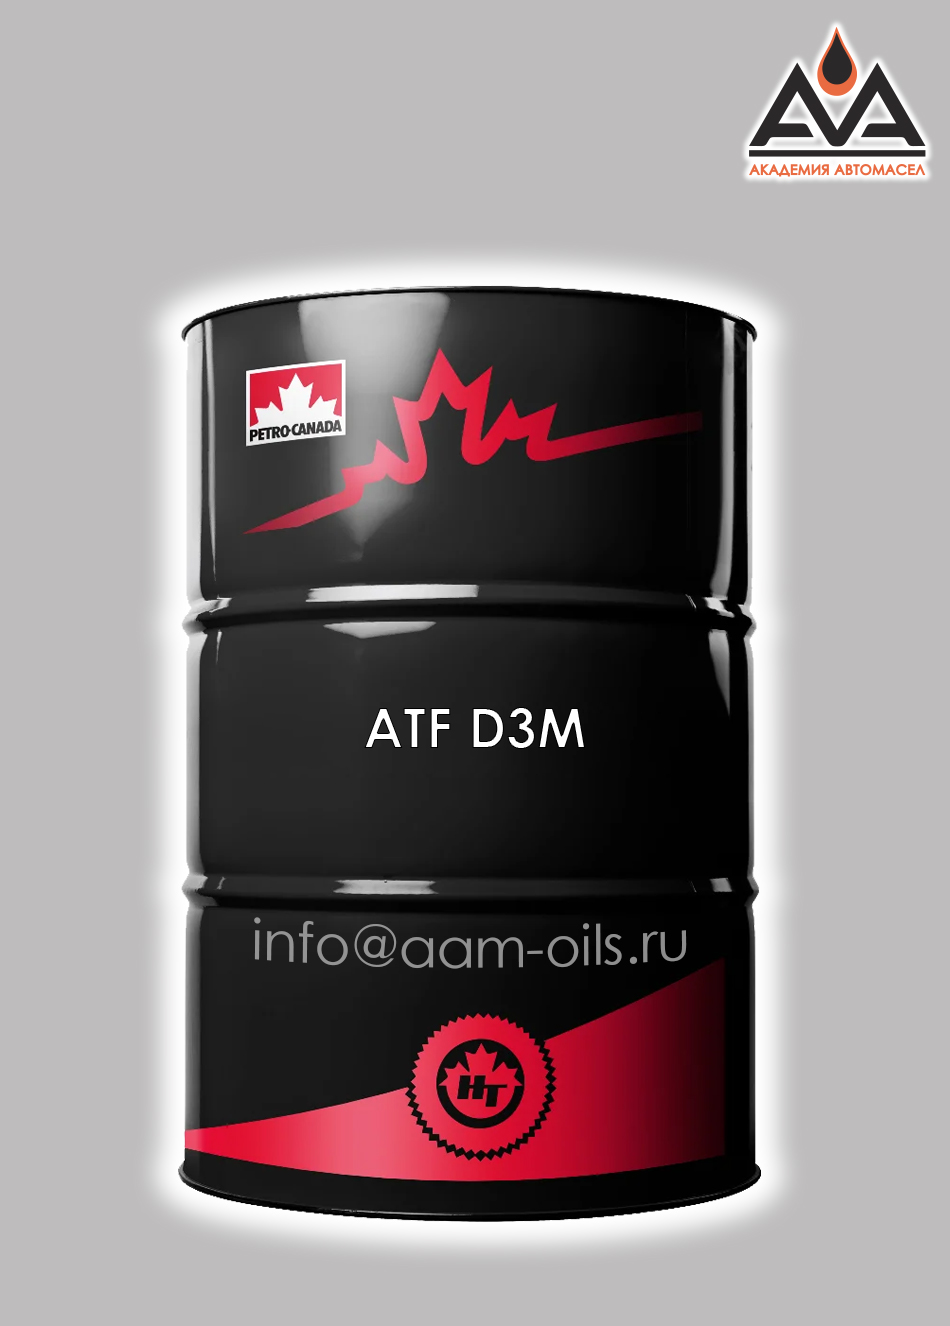 Atf d3. Масло Petro Canada ATF d3m. Petro-Canada 10w30 205л. Масло Петро Канада 10w30 SHP Duron. ATF d3m аналоги.